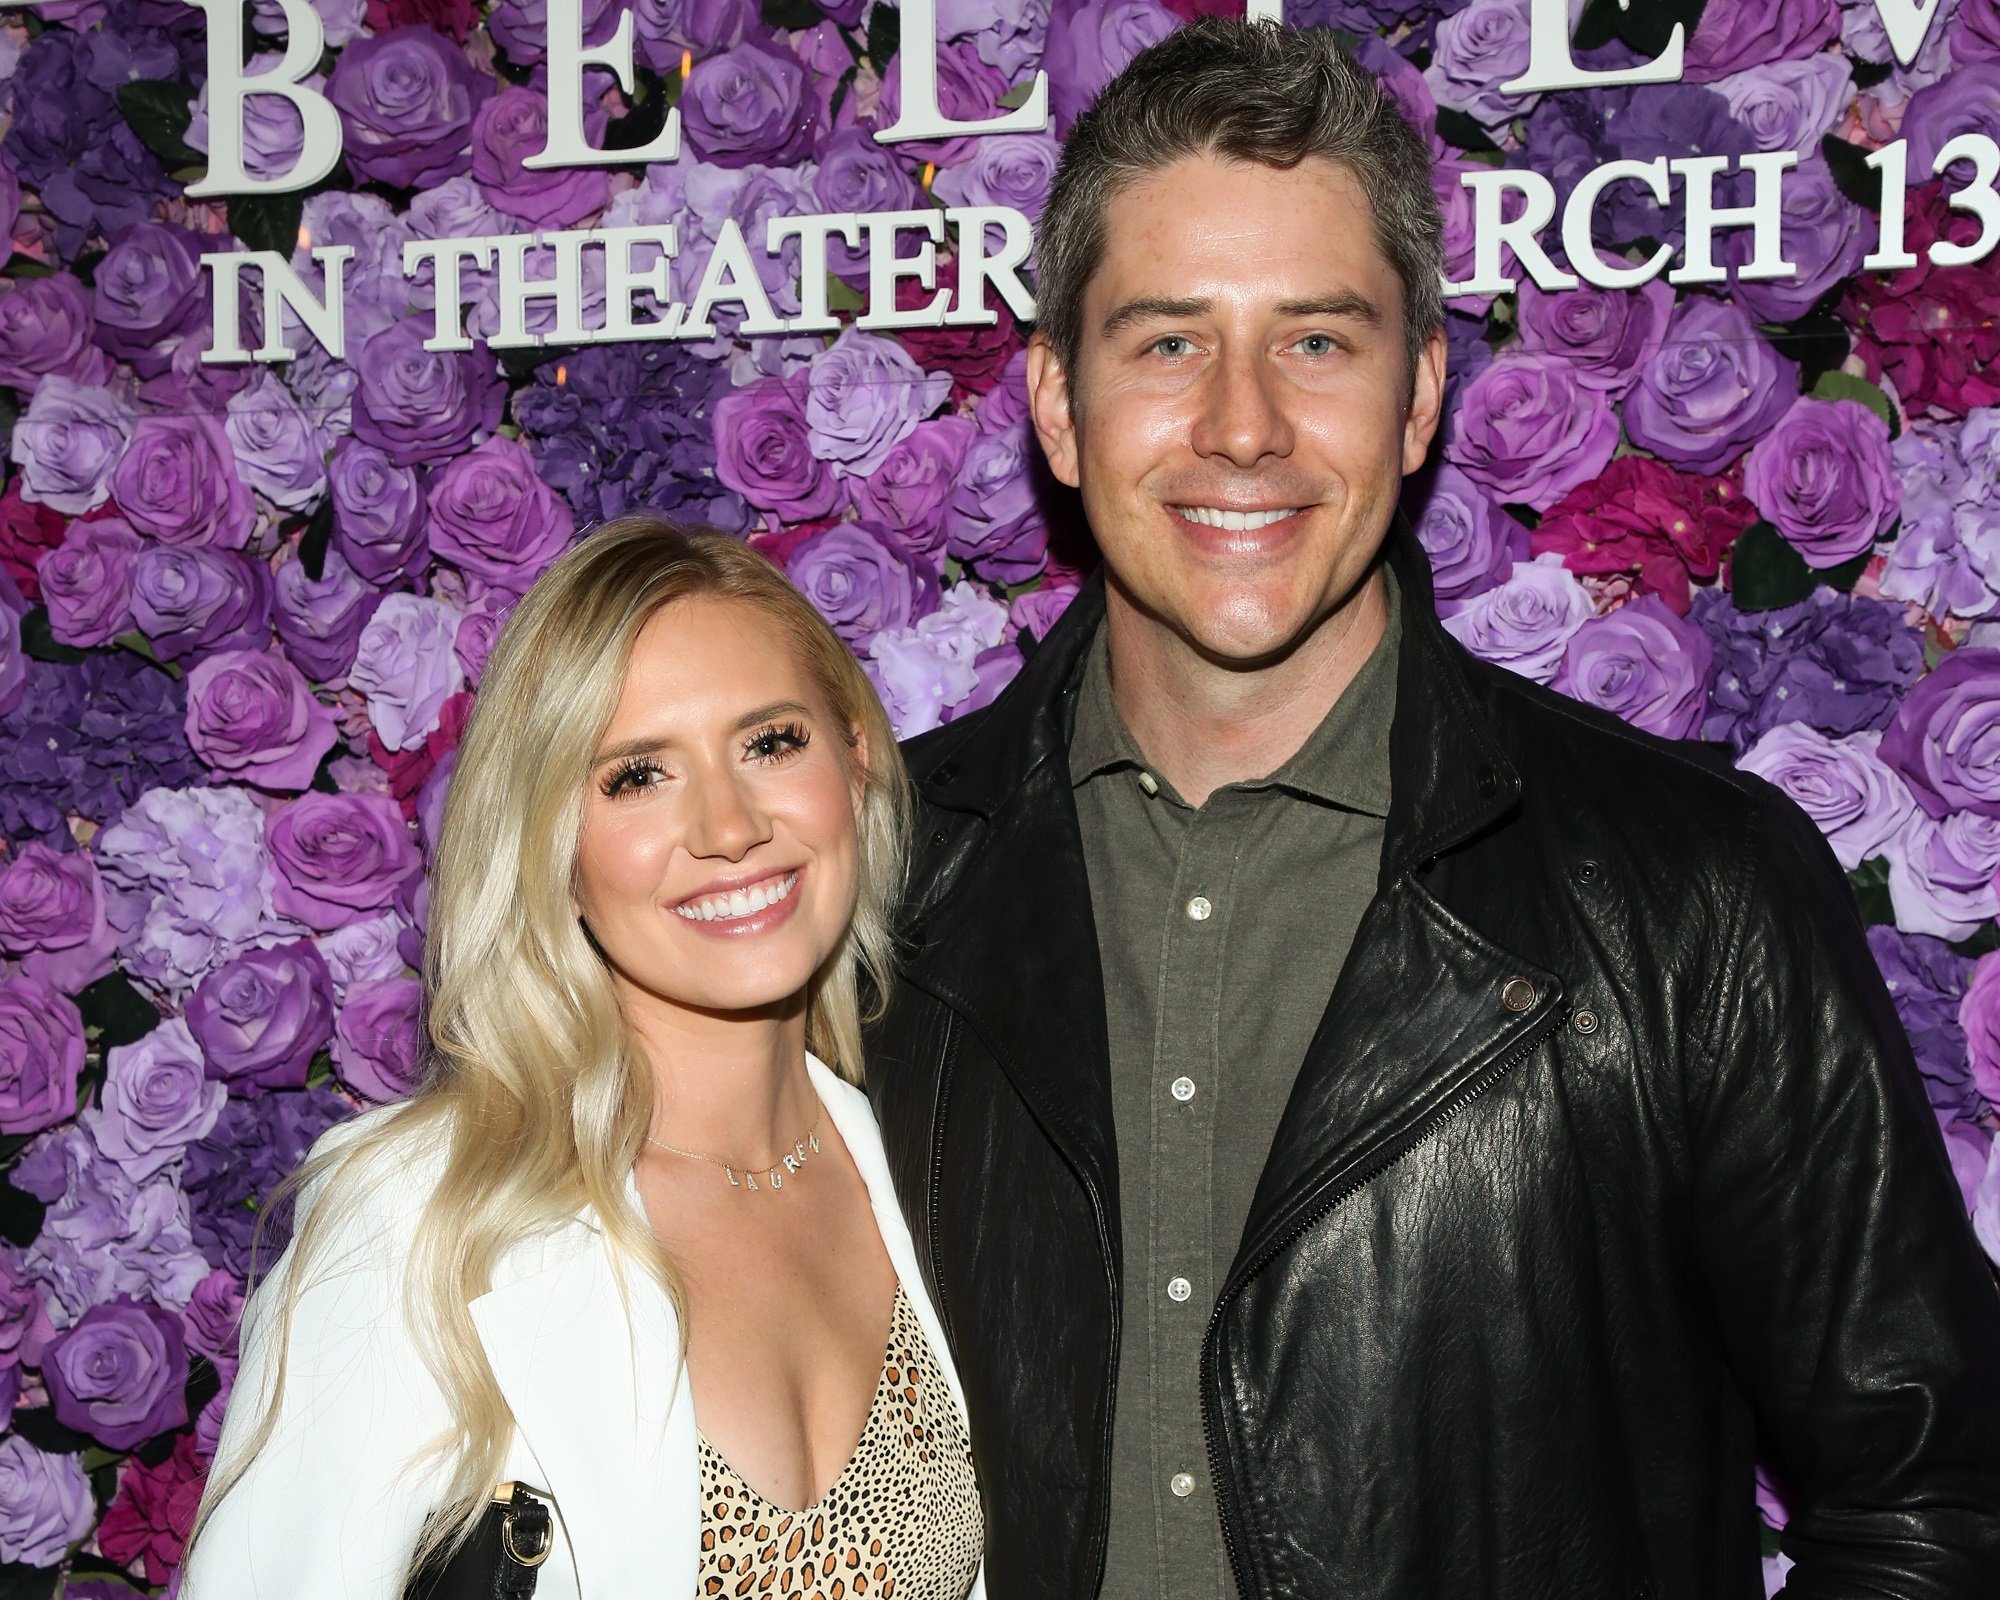 The Bachelor Arie Luyendyk Jr And Lauren Burnham Reveal The Sex Of Their Twins